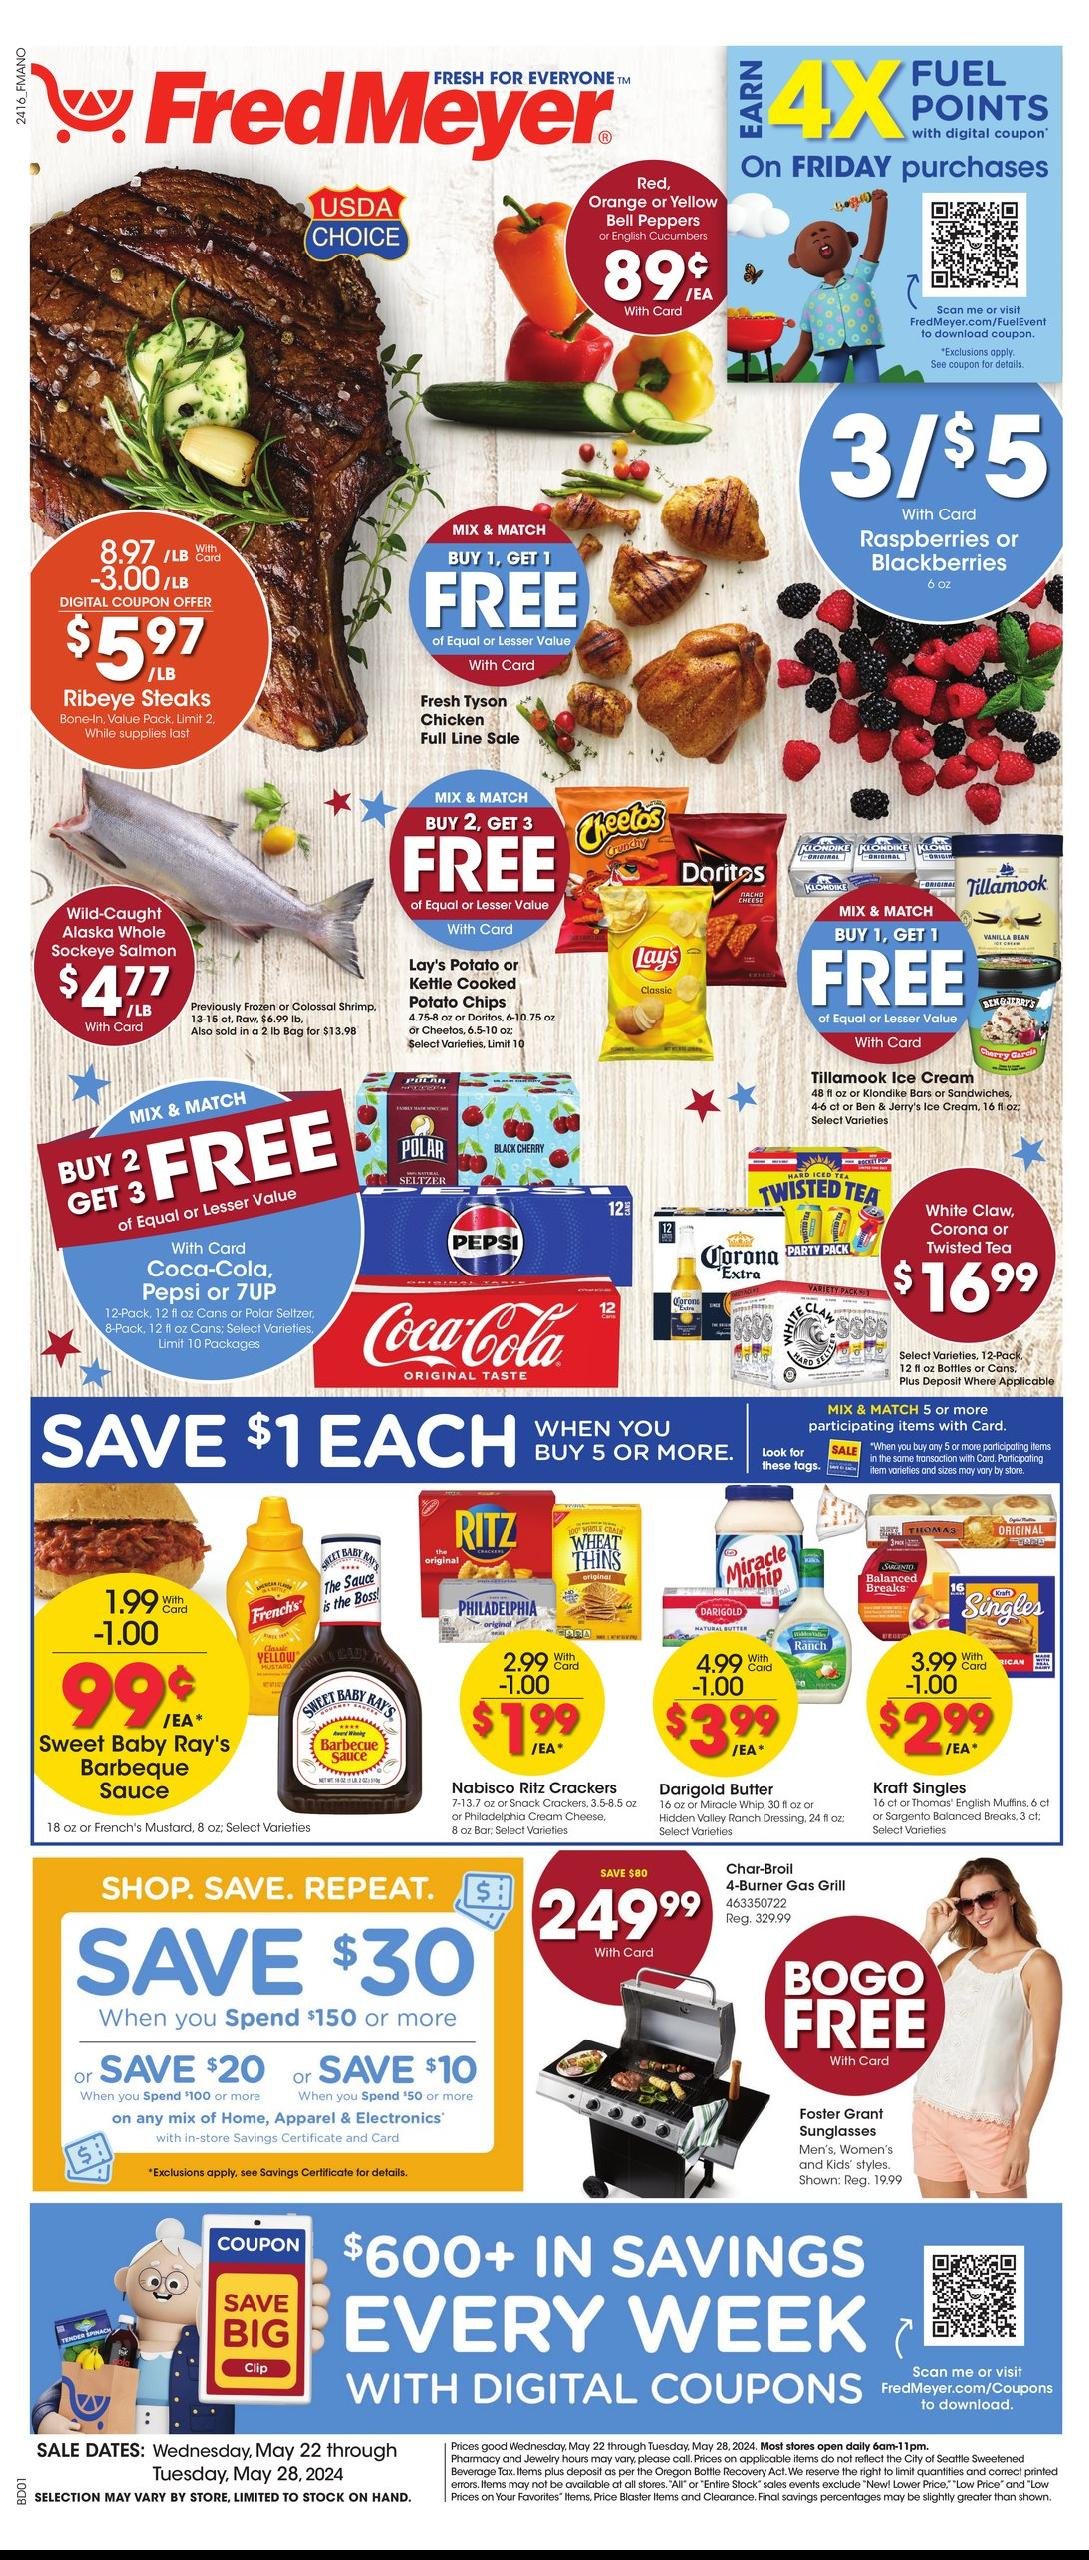 Fred Meyer weekly ad - page 1